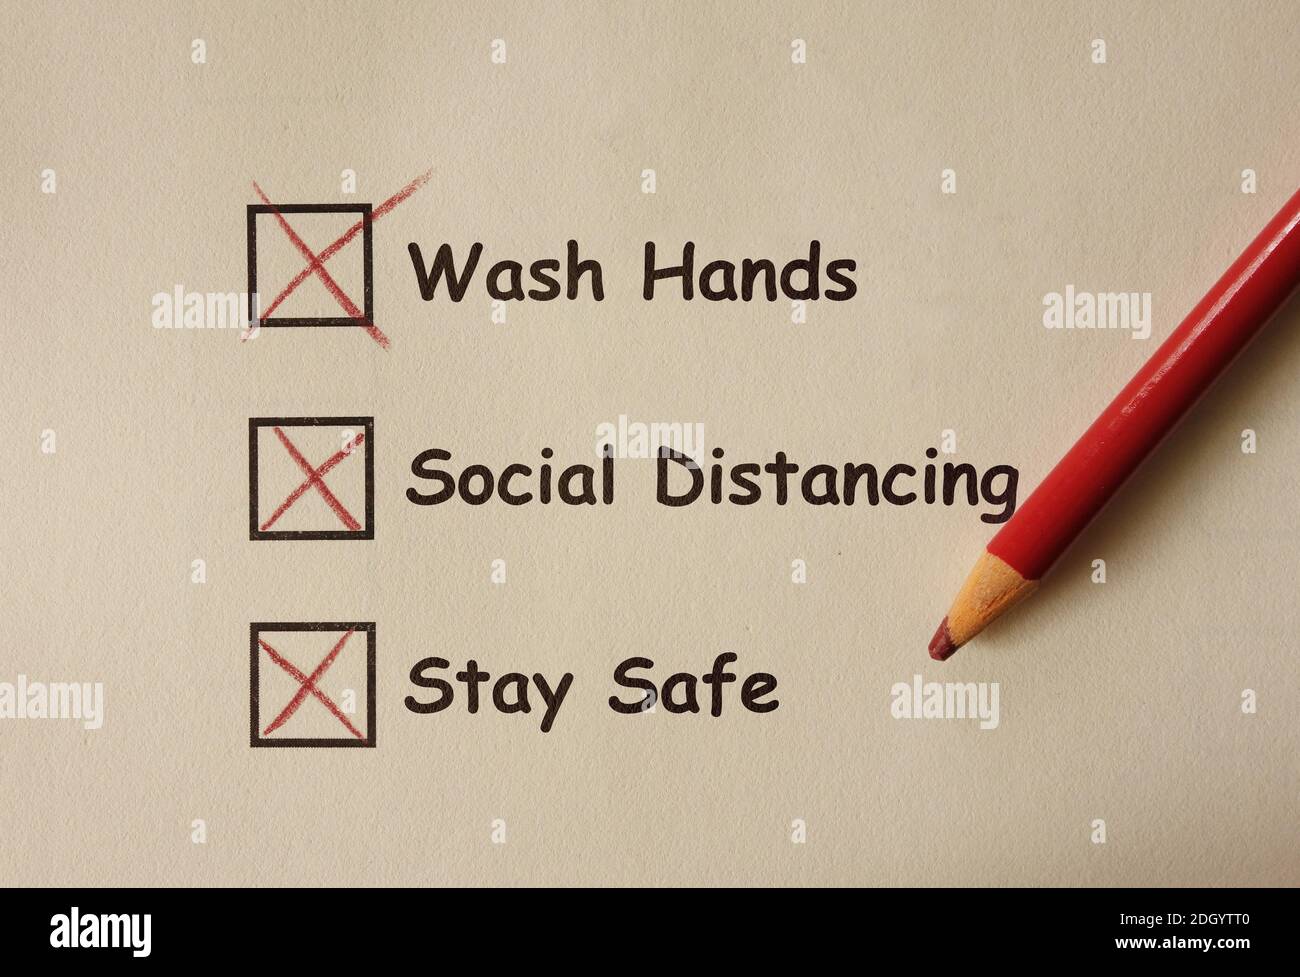 Wash Hands , Social Distancing , Stay Safe  -- CoronaVirus prevention Stock Photo